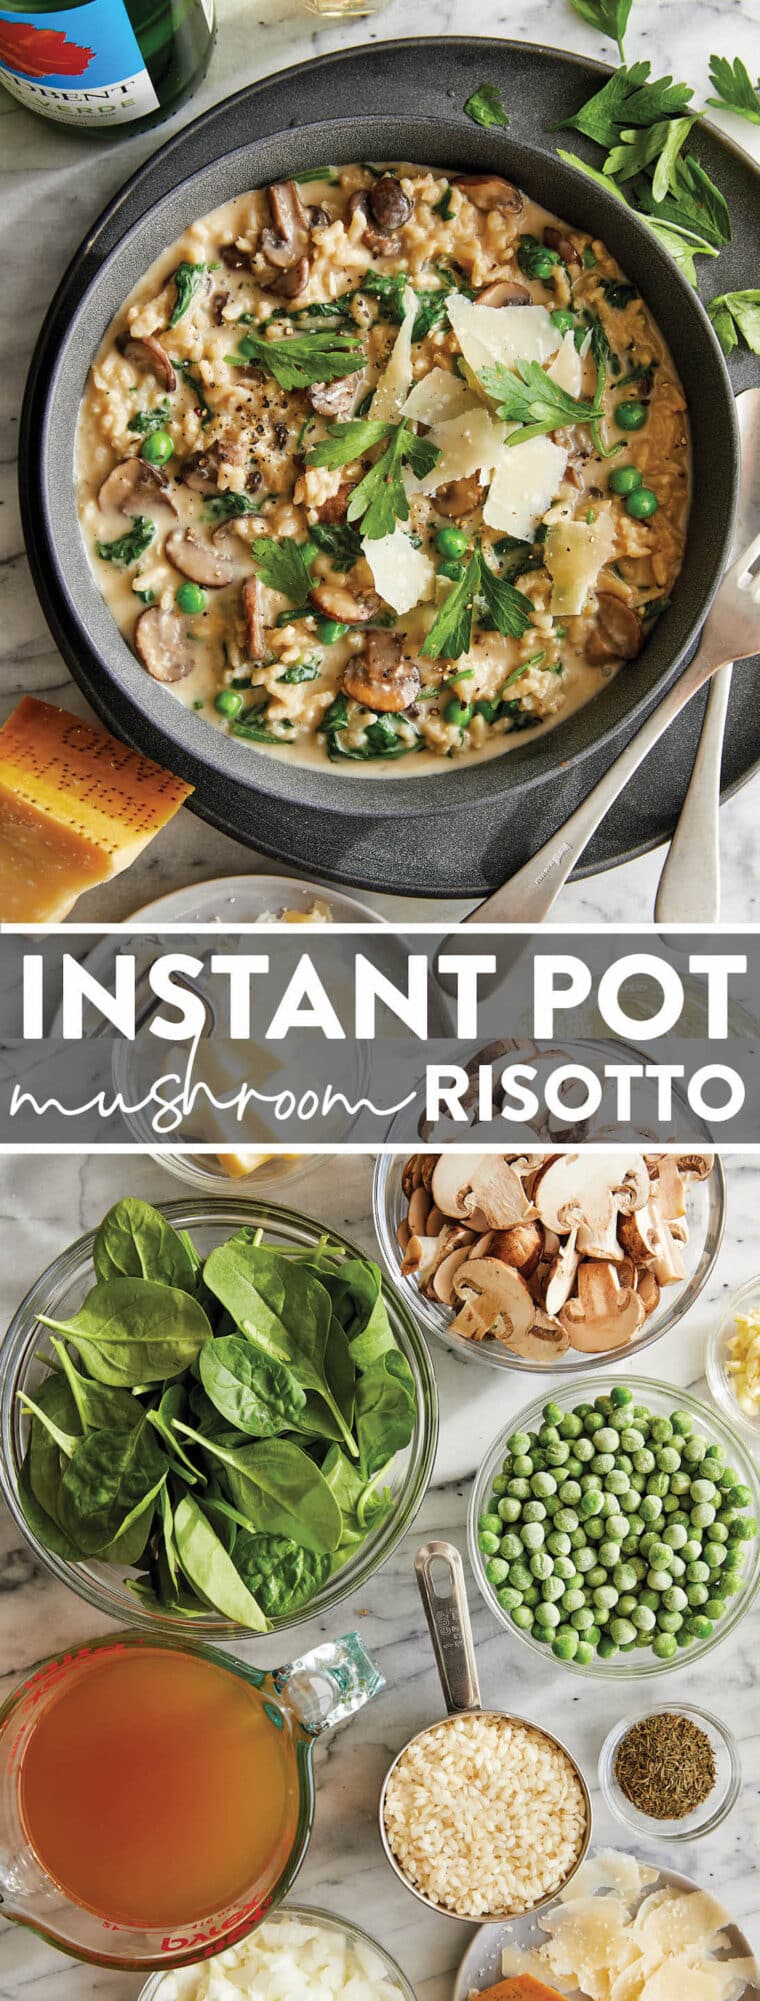 Instant Pot - We might be a little biased, but we love the